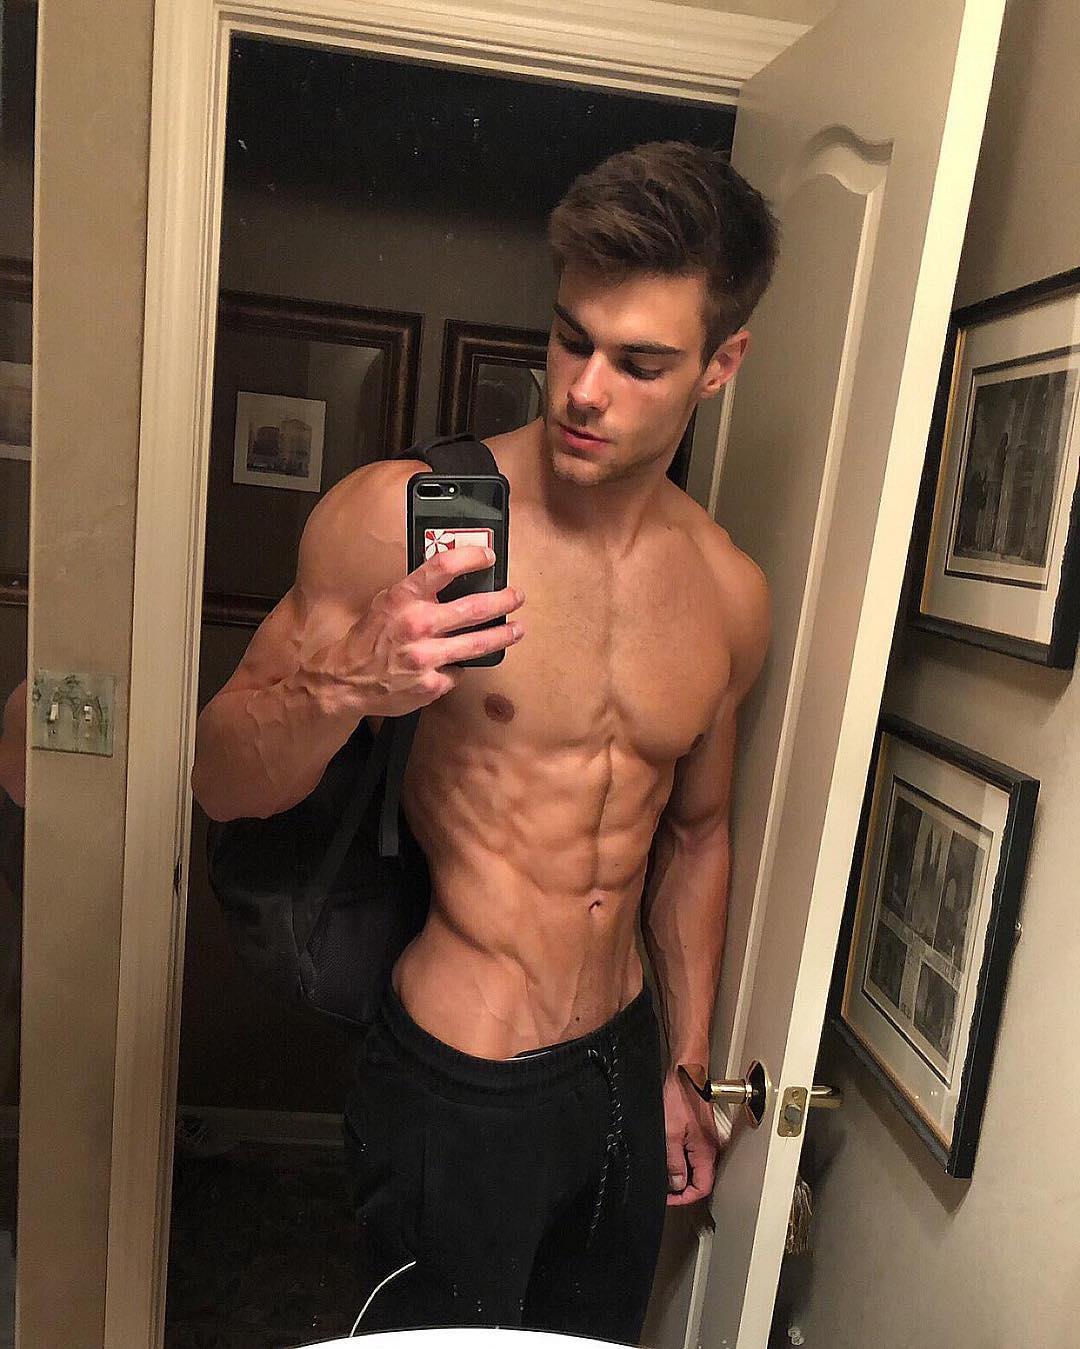 Hot guys: Fit guys of the day